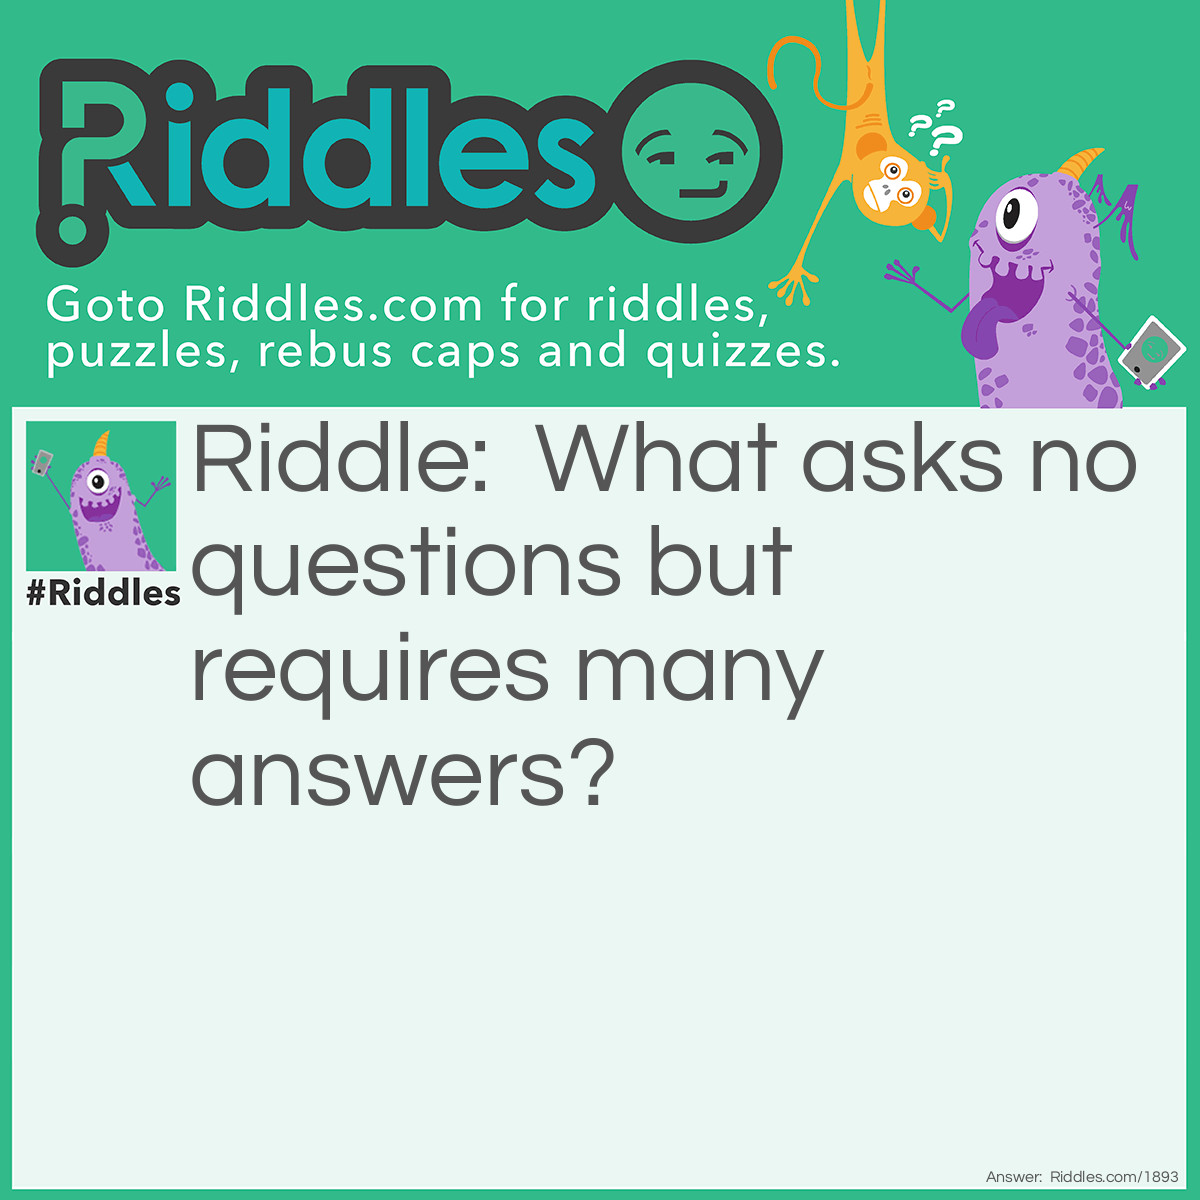 Riddle: What asks no questions but requires many answers? Answer: A doorbell.